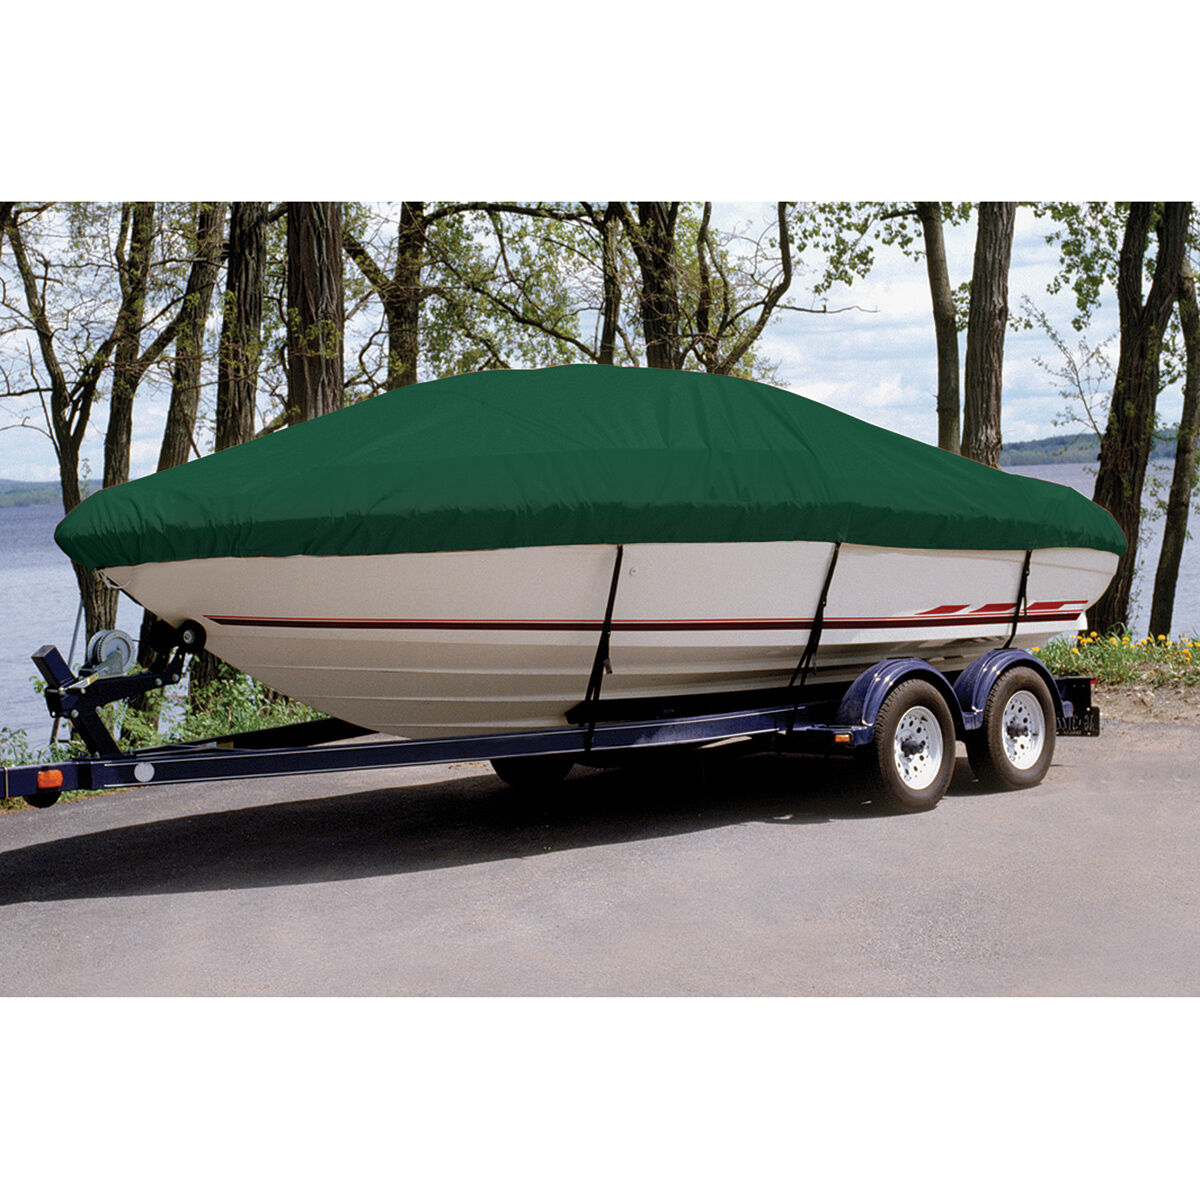 Taylor Trailerite Ultima Cover for 09-12 Lund 1625 Rebel XL Sport PTM O/B in Green